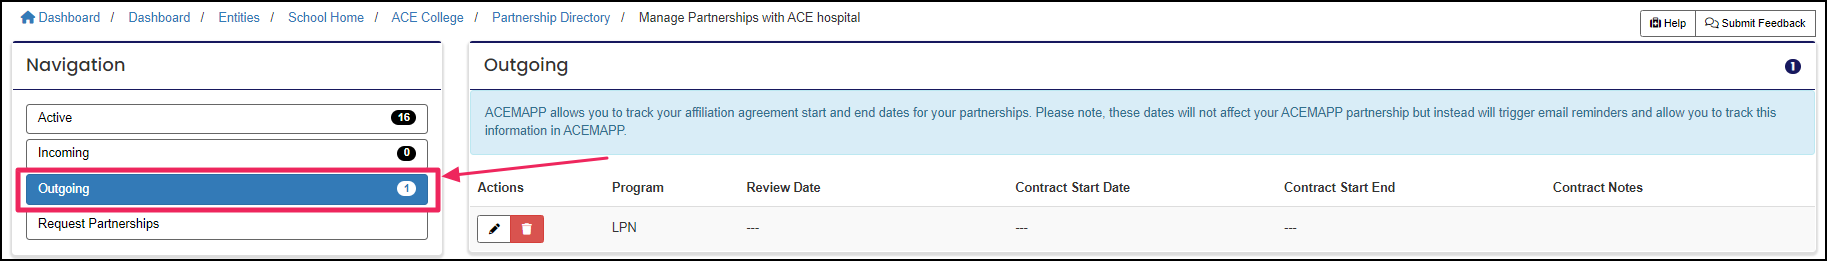 Image shows manage partnerships page highlighting the outgoing tab.